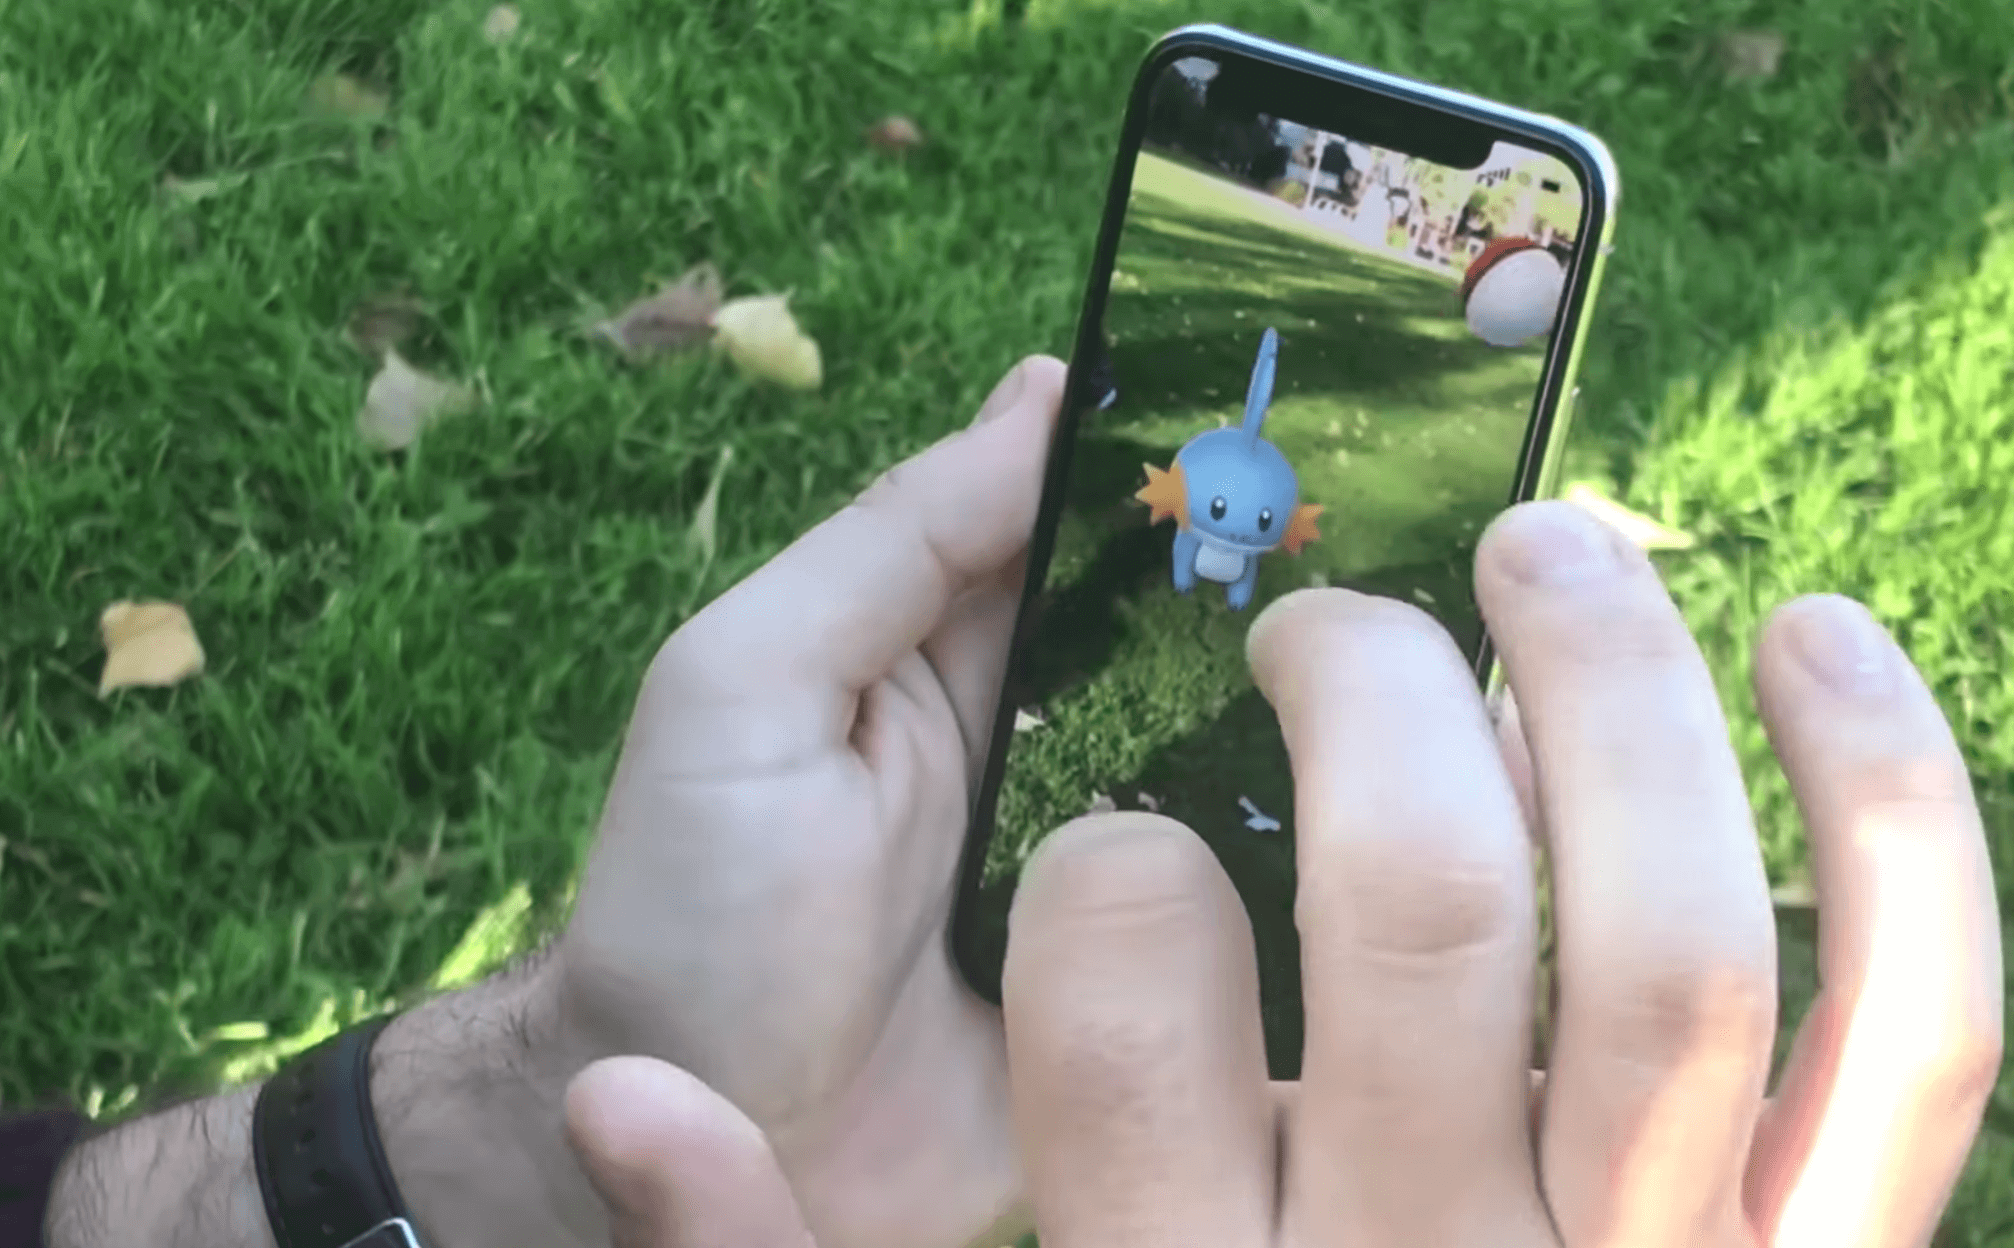 Police officers fired for ignoring robbery to play Pokémon Go denied appeal